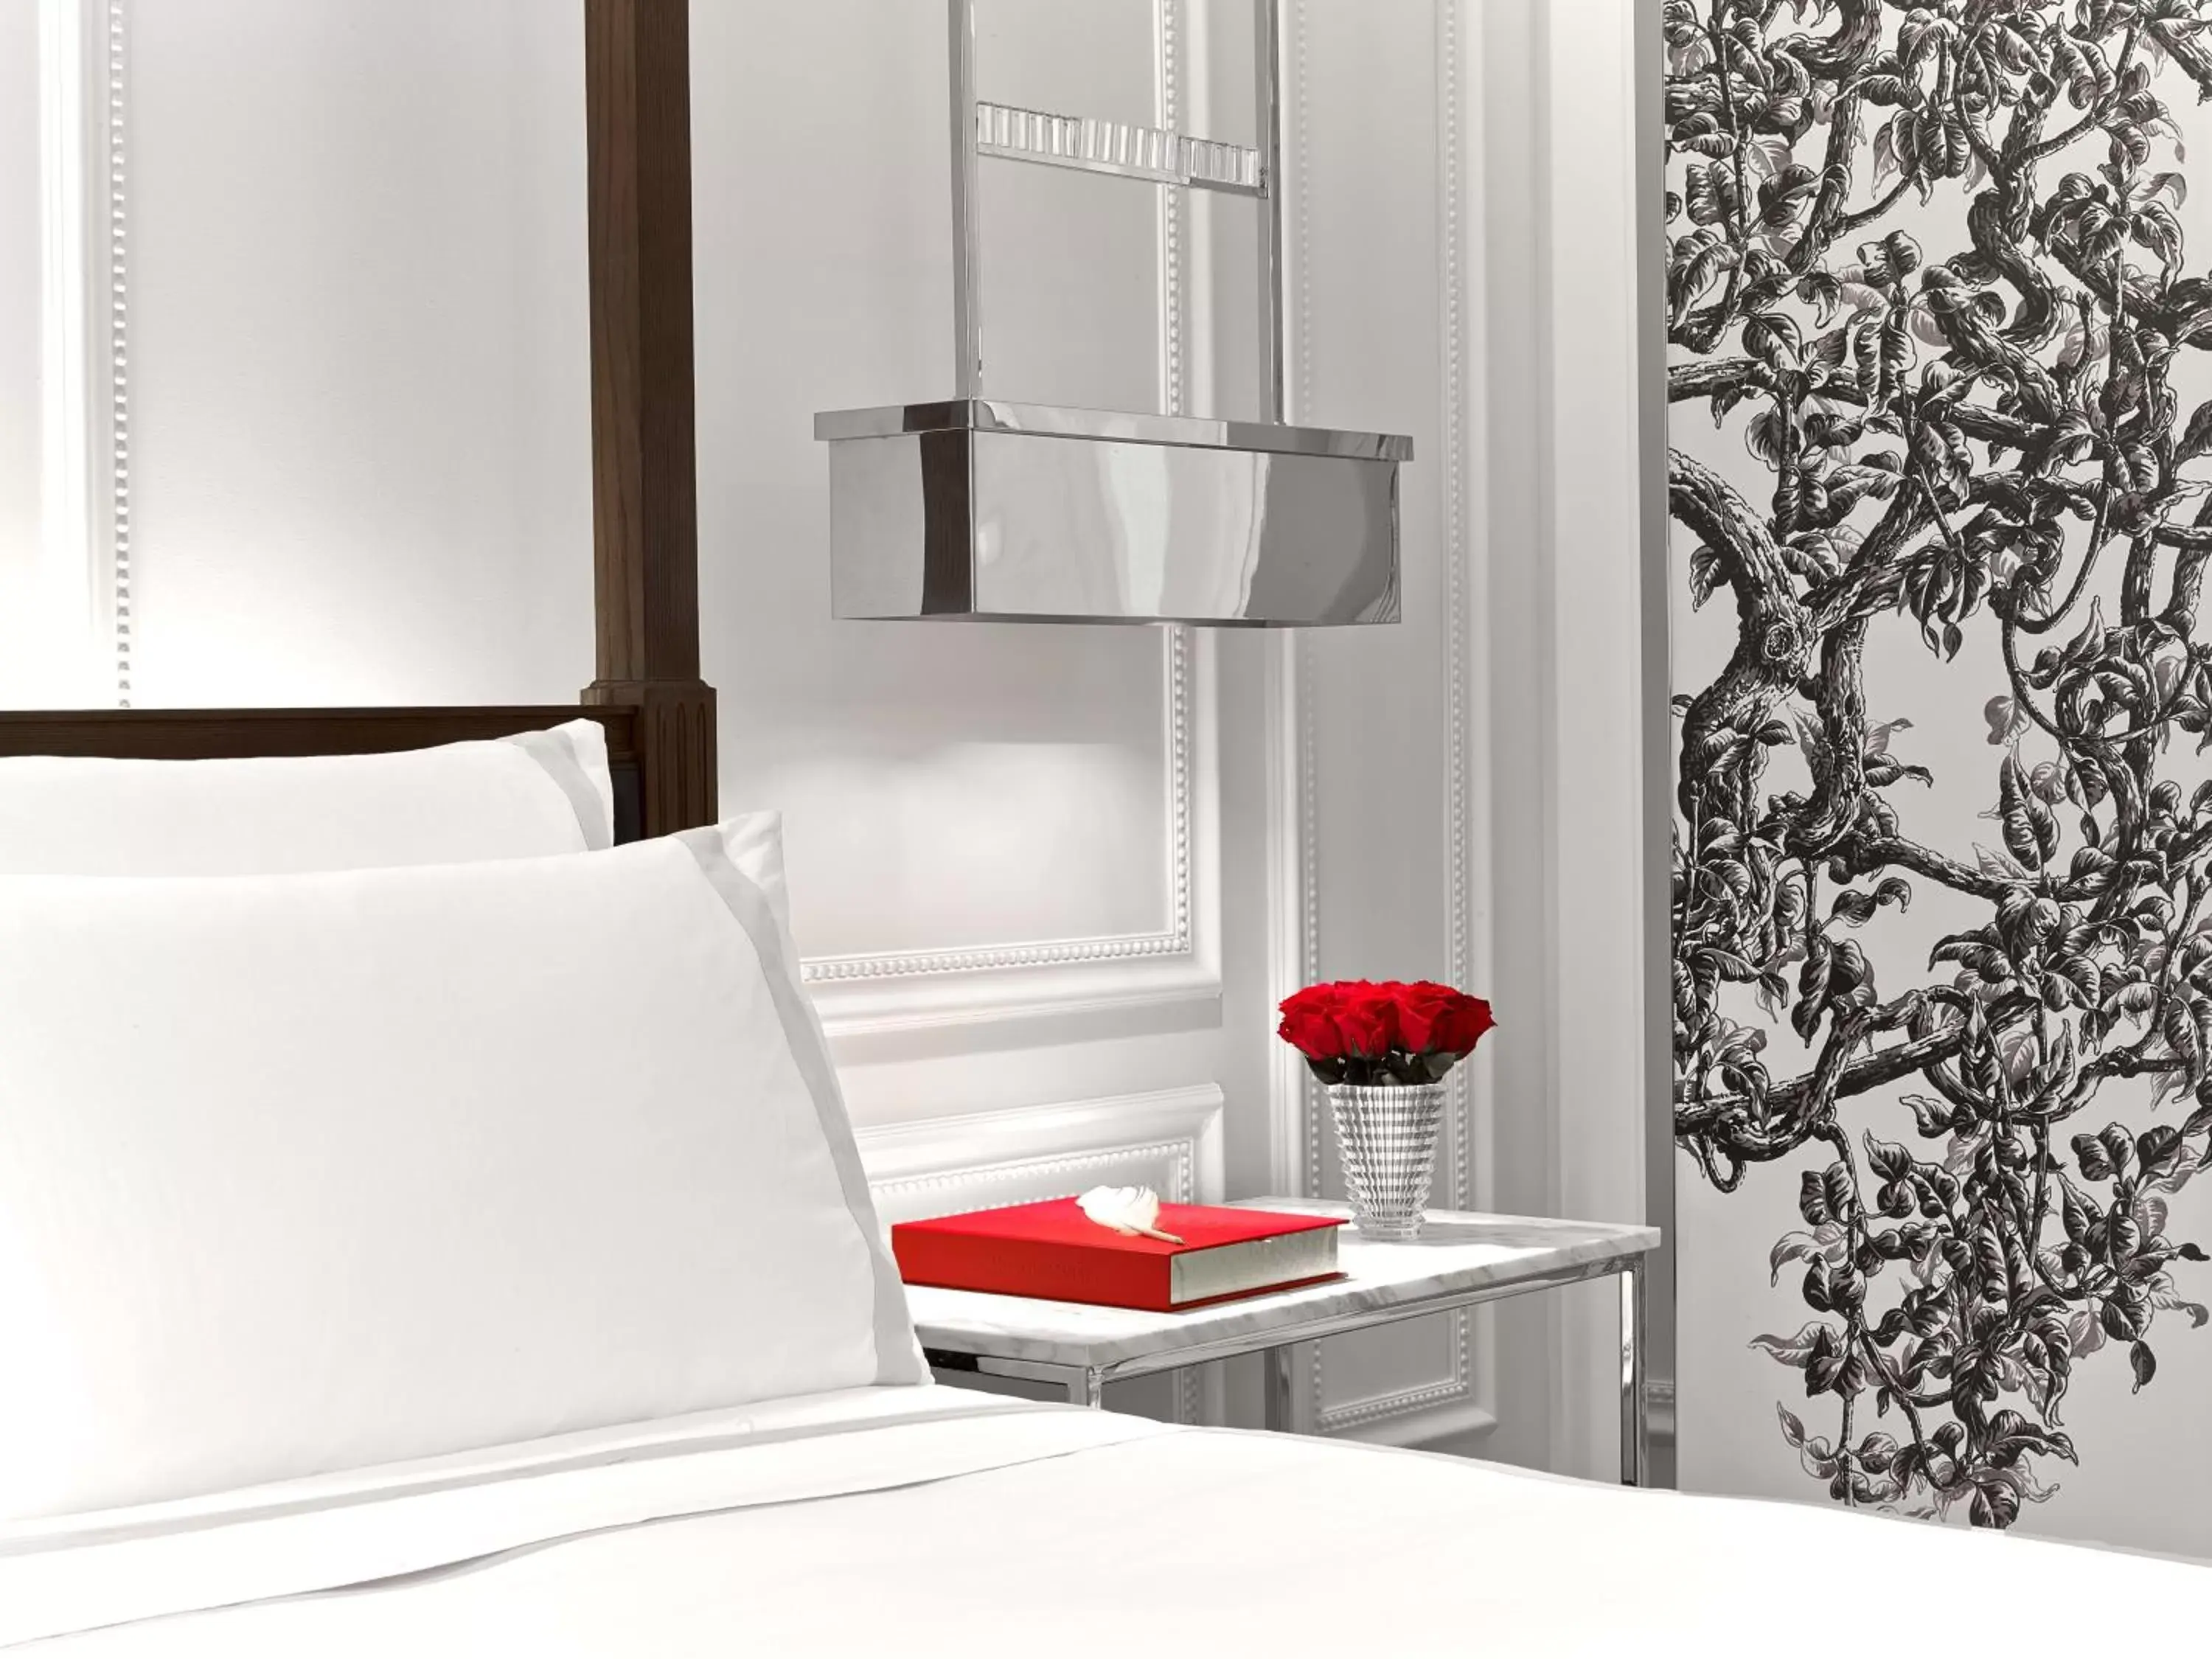 Bed, Bathroom in Baccarat Hotel and Residences New York